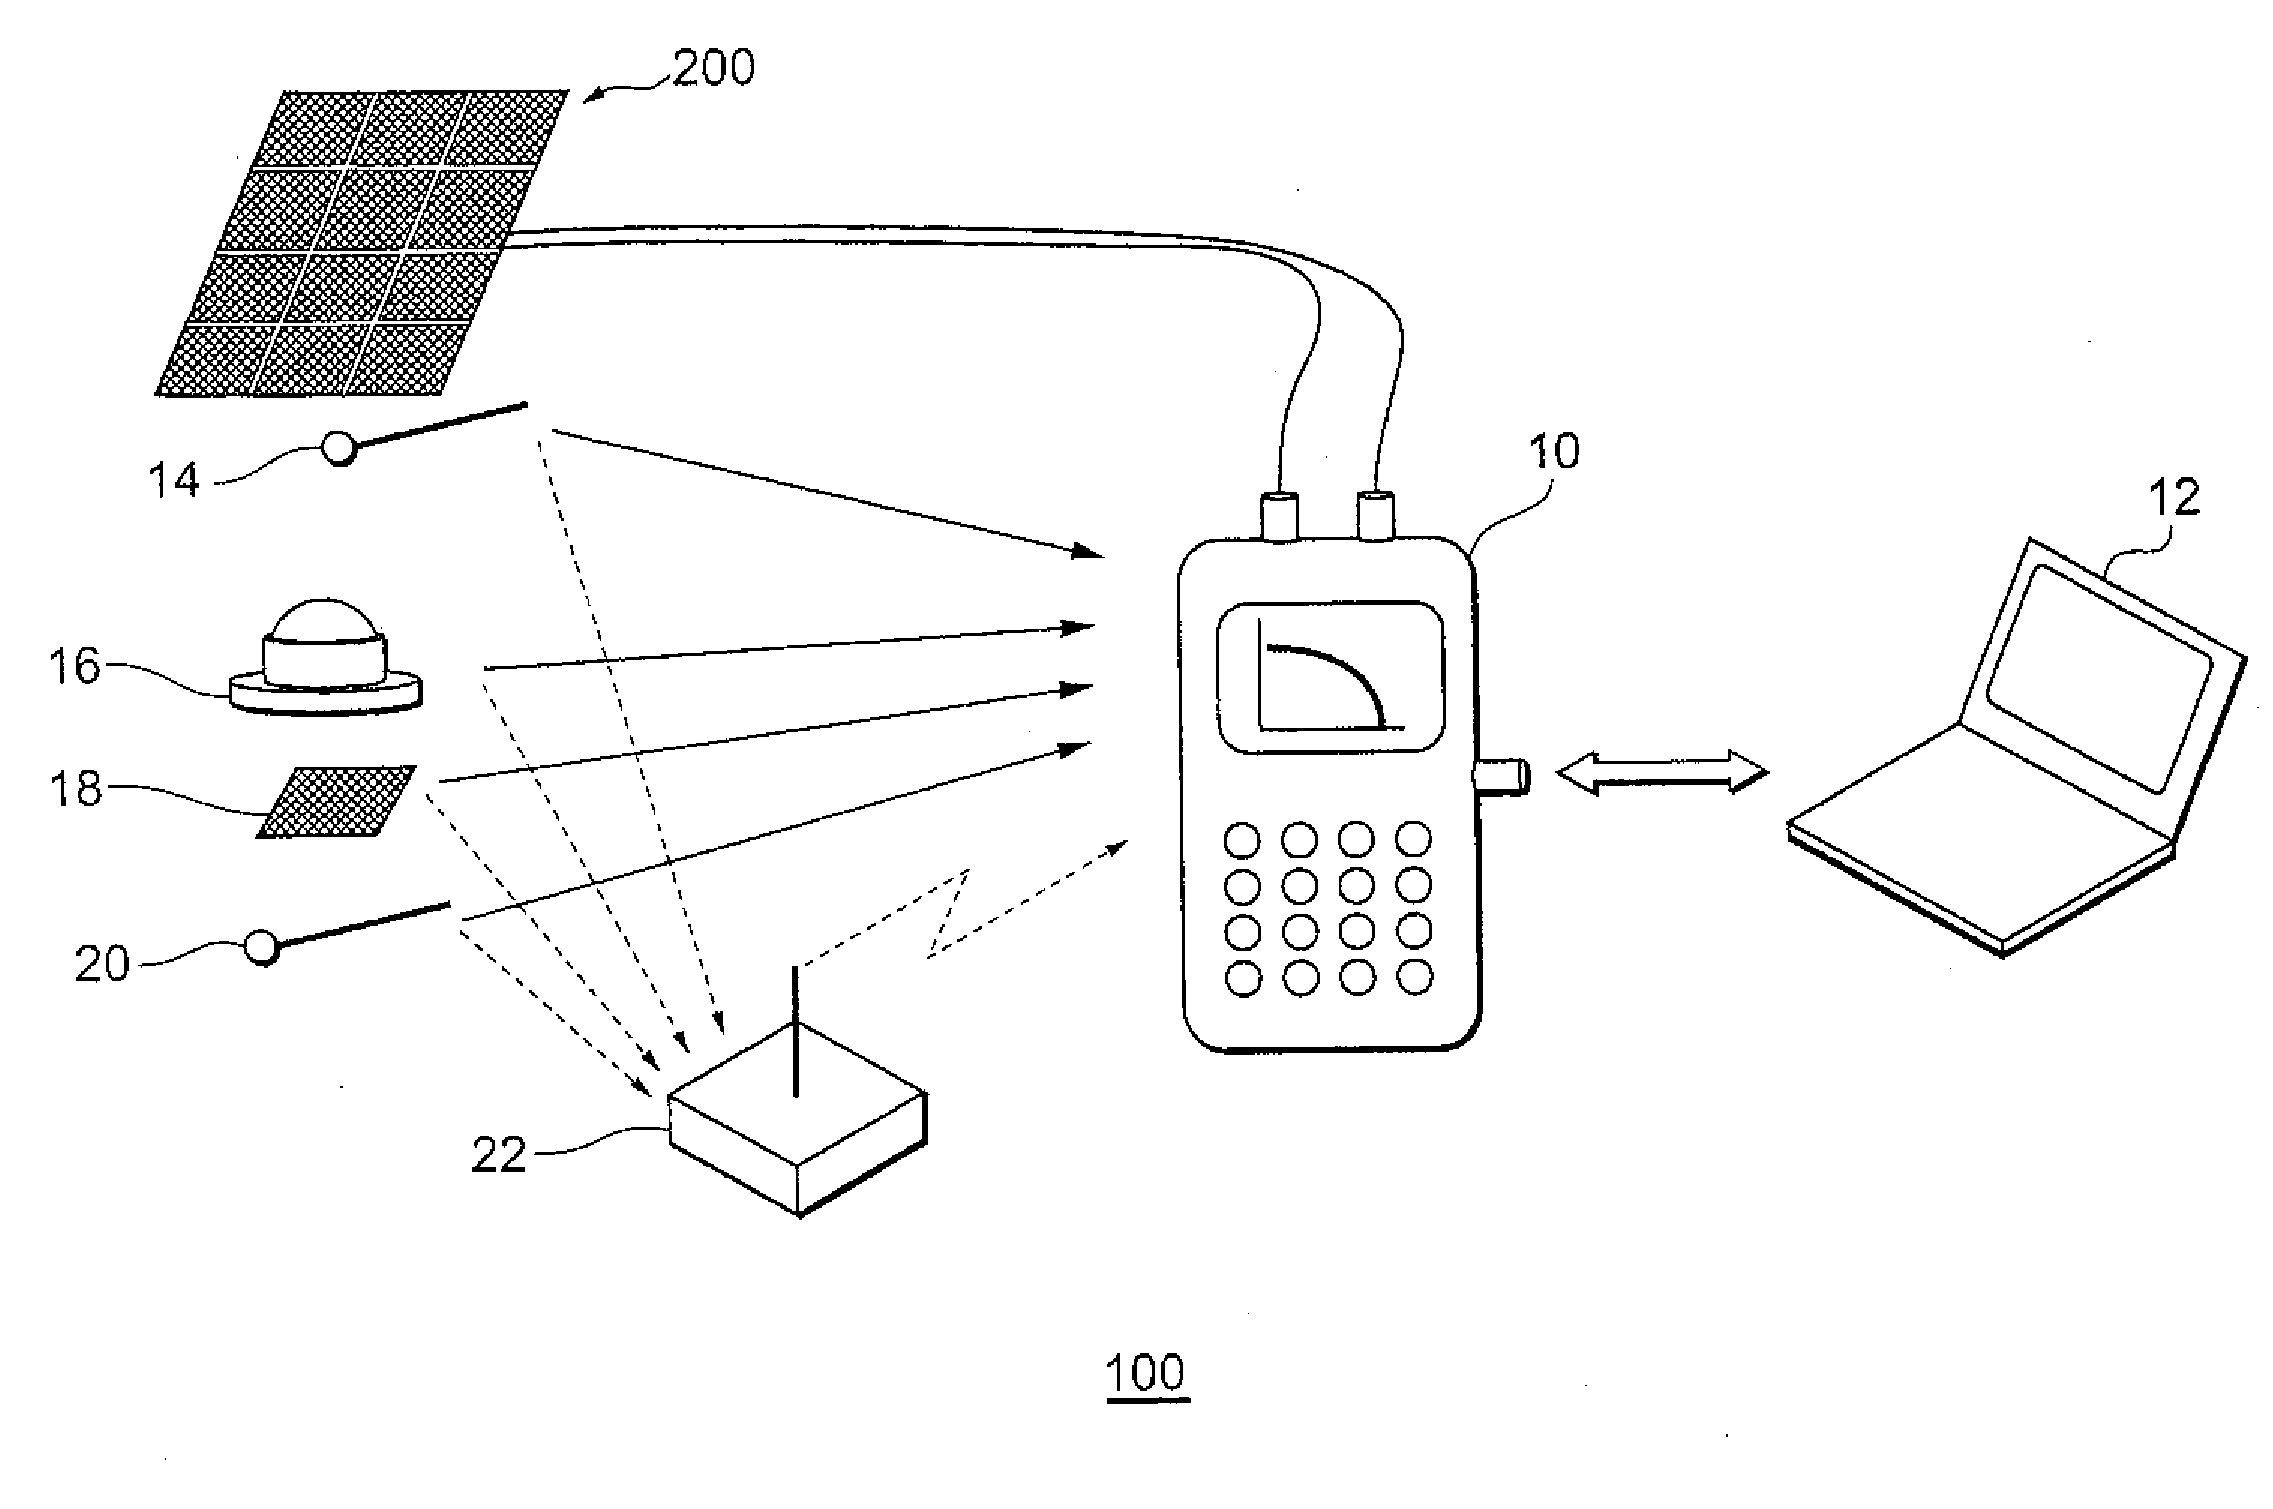 Photovoltaic Device Characterization Apparatus